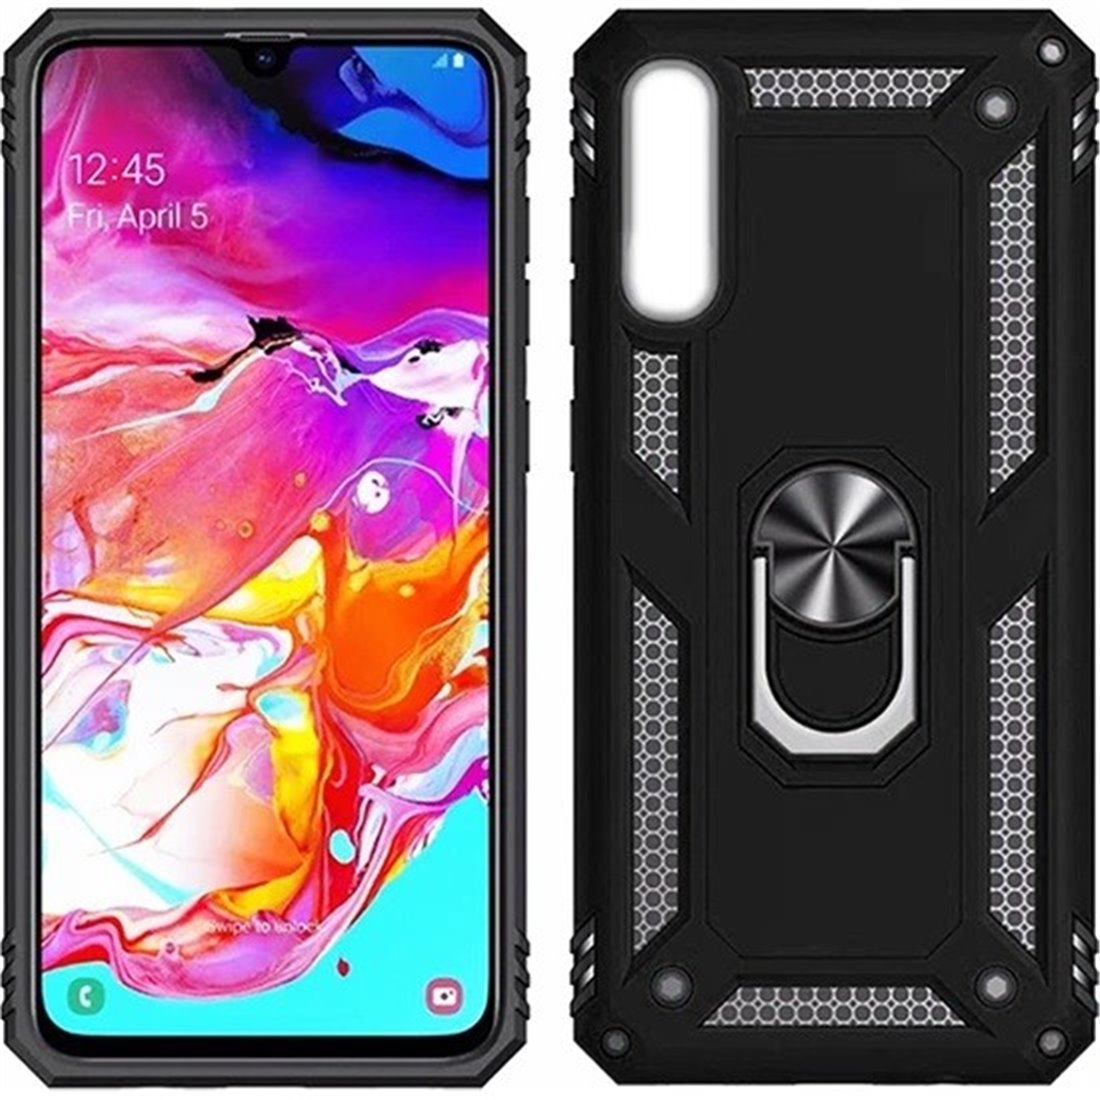 Samsung Galaxy A10 Plastic Black Back Cover - Solid ring